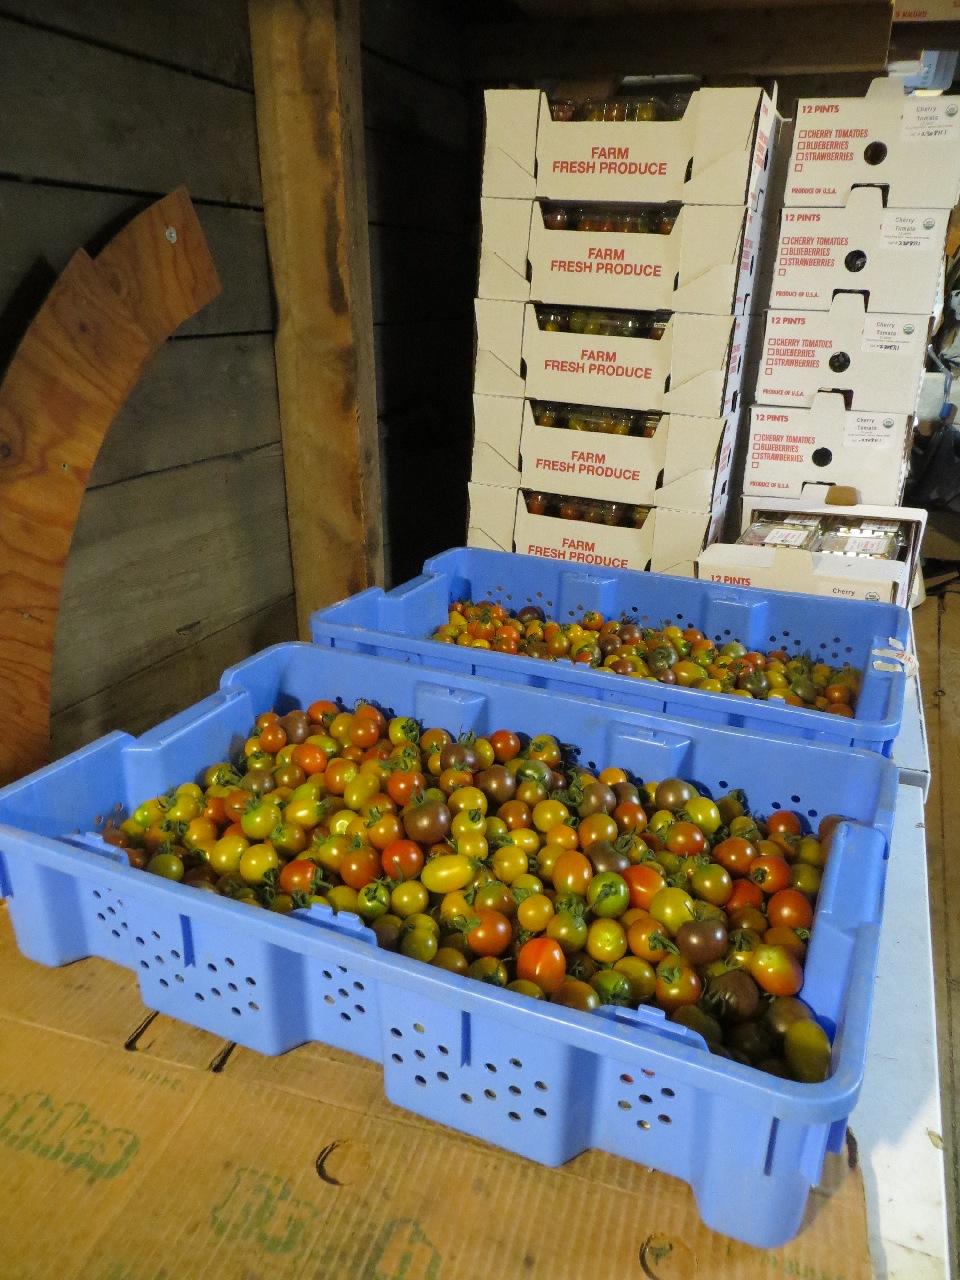 The interior of a rough wooden shed. Two blue plastic produce trays are mostly full of a variety of cherry and grape tomatoes in the foreground: behind that are stacks of white cardboard boxes holding plastic pint containers of more.